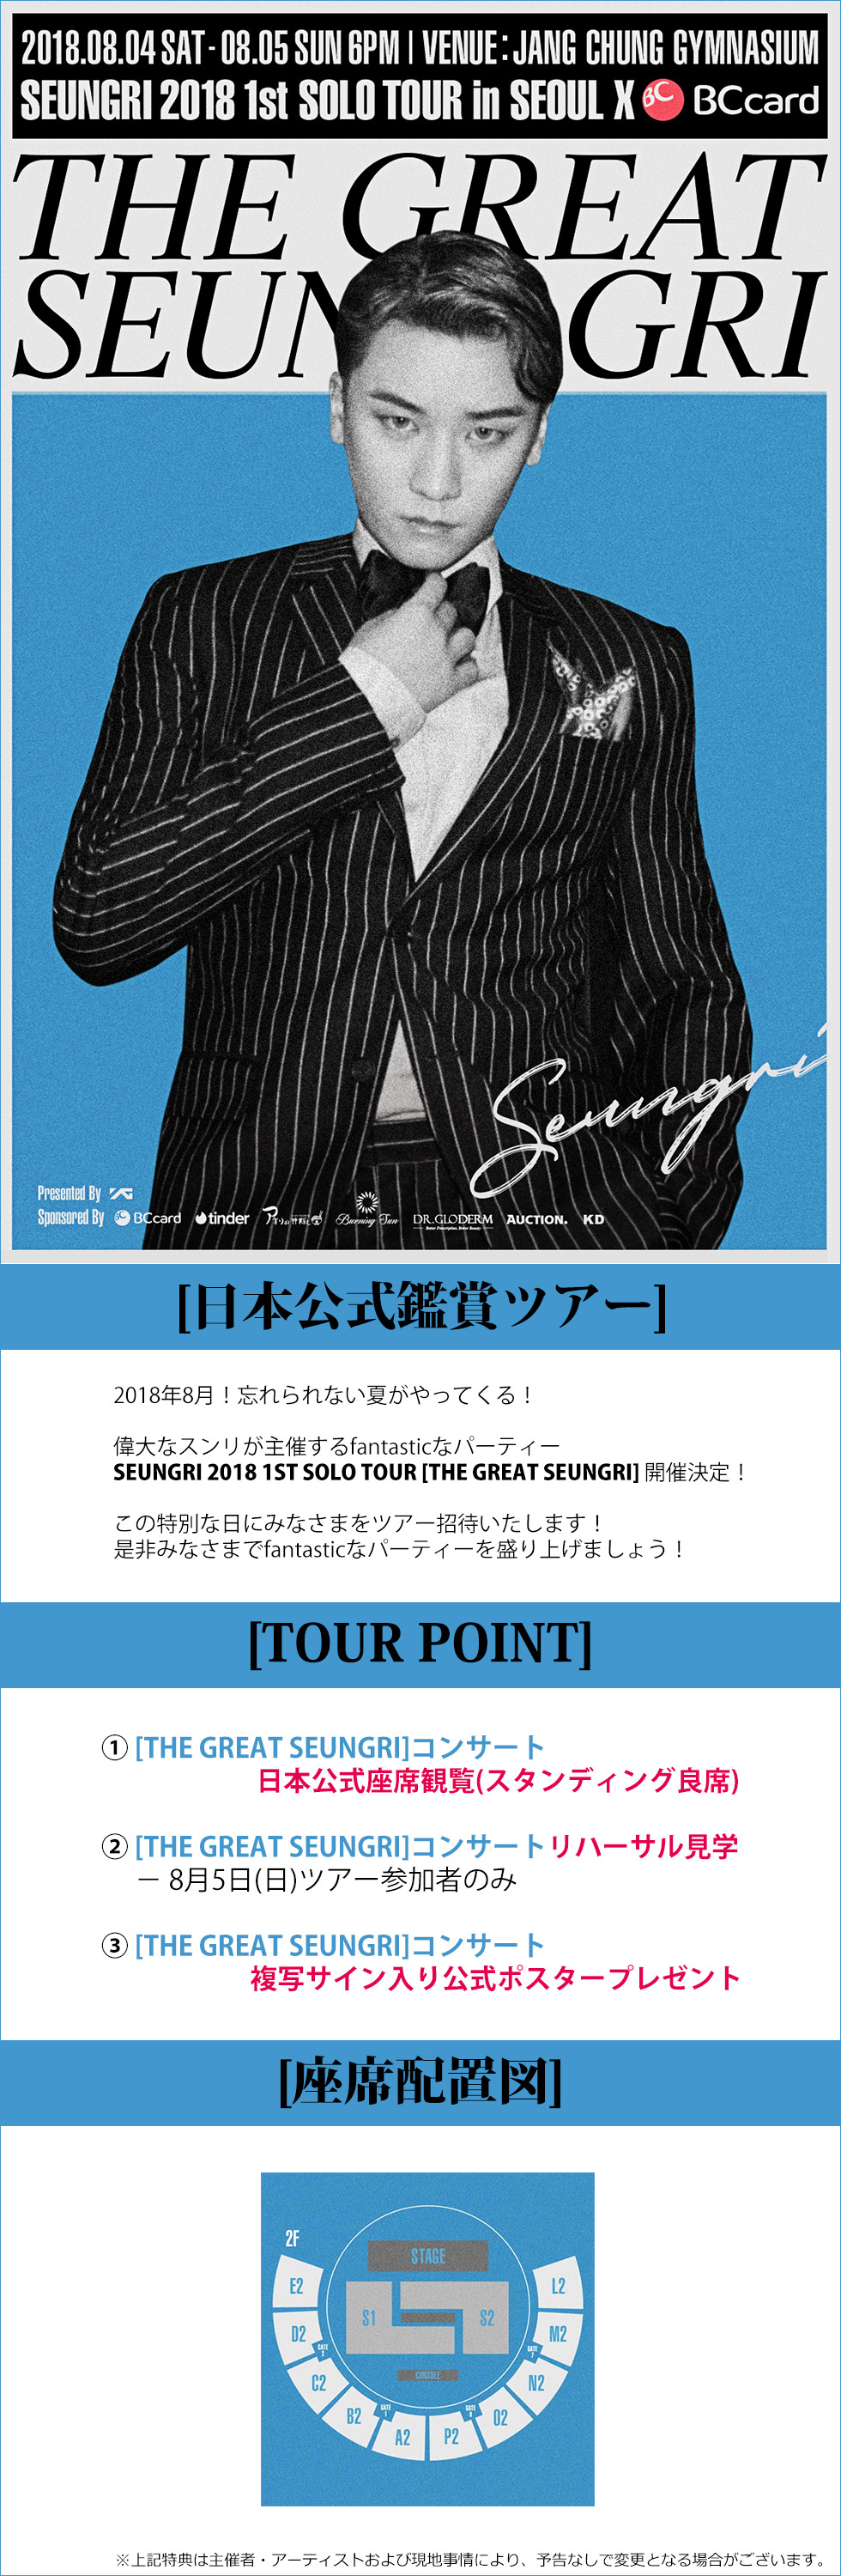 SEUNGRI 2018 1ST SOLO TOUR [THE GREAT SEUNGR]公式ツアー